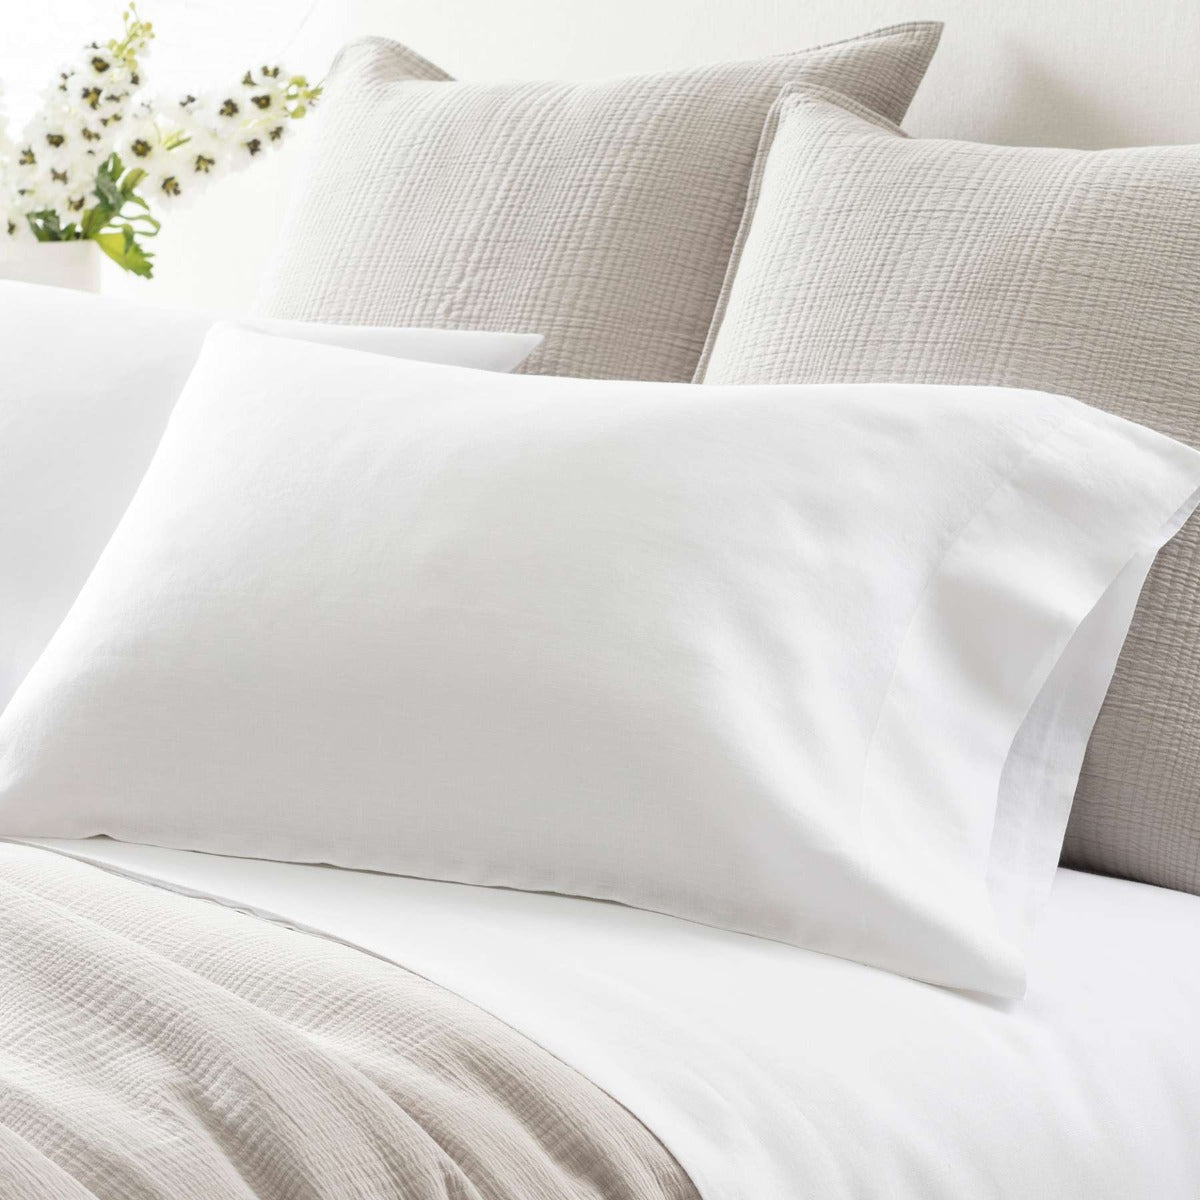 Lush Linen White Pillowcases styled with neutral bedding. Styled view. 